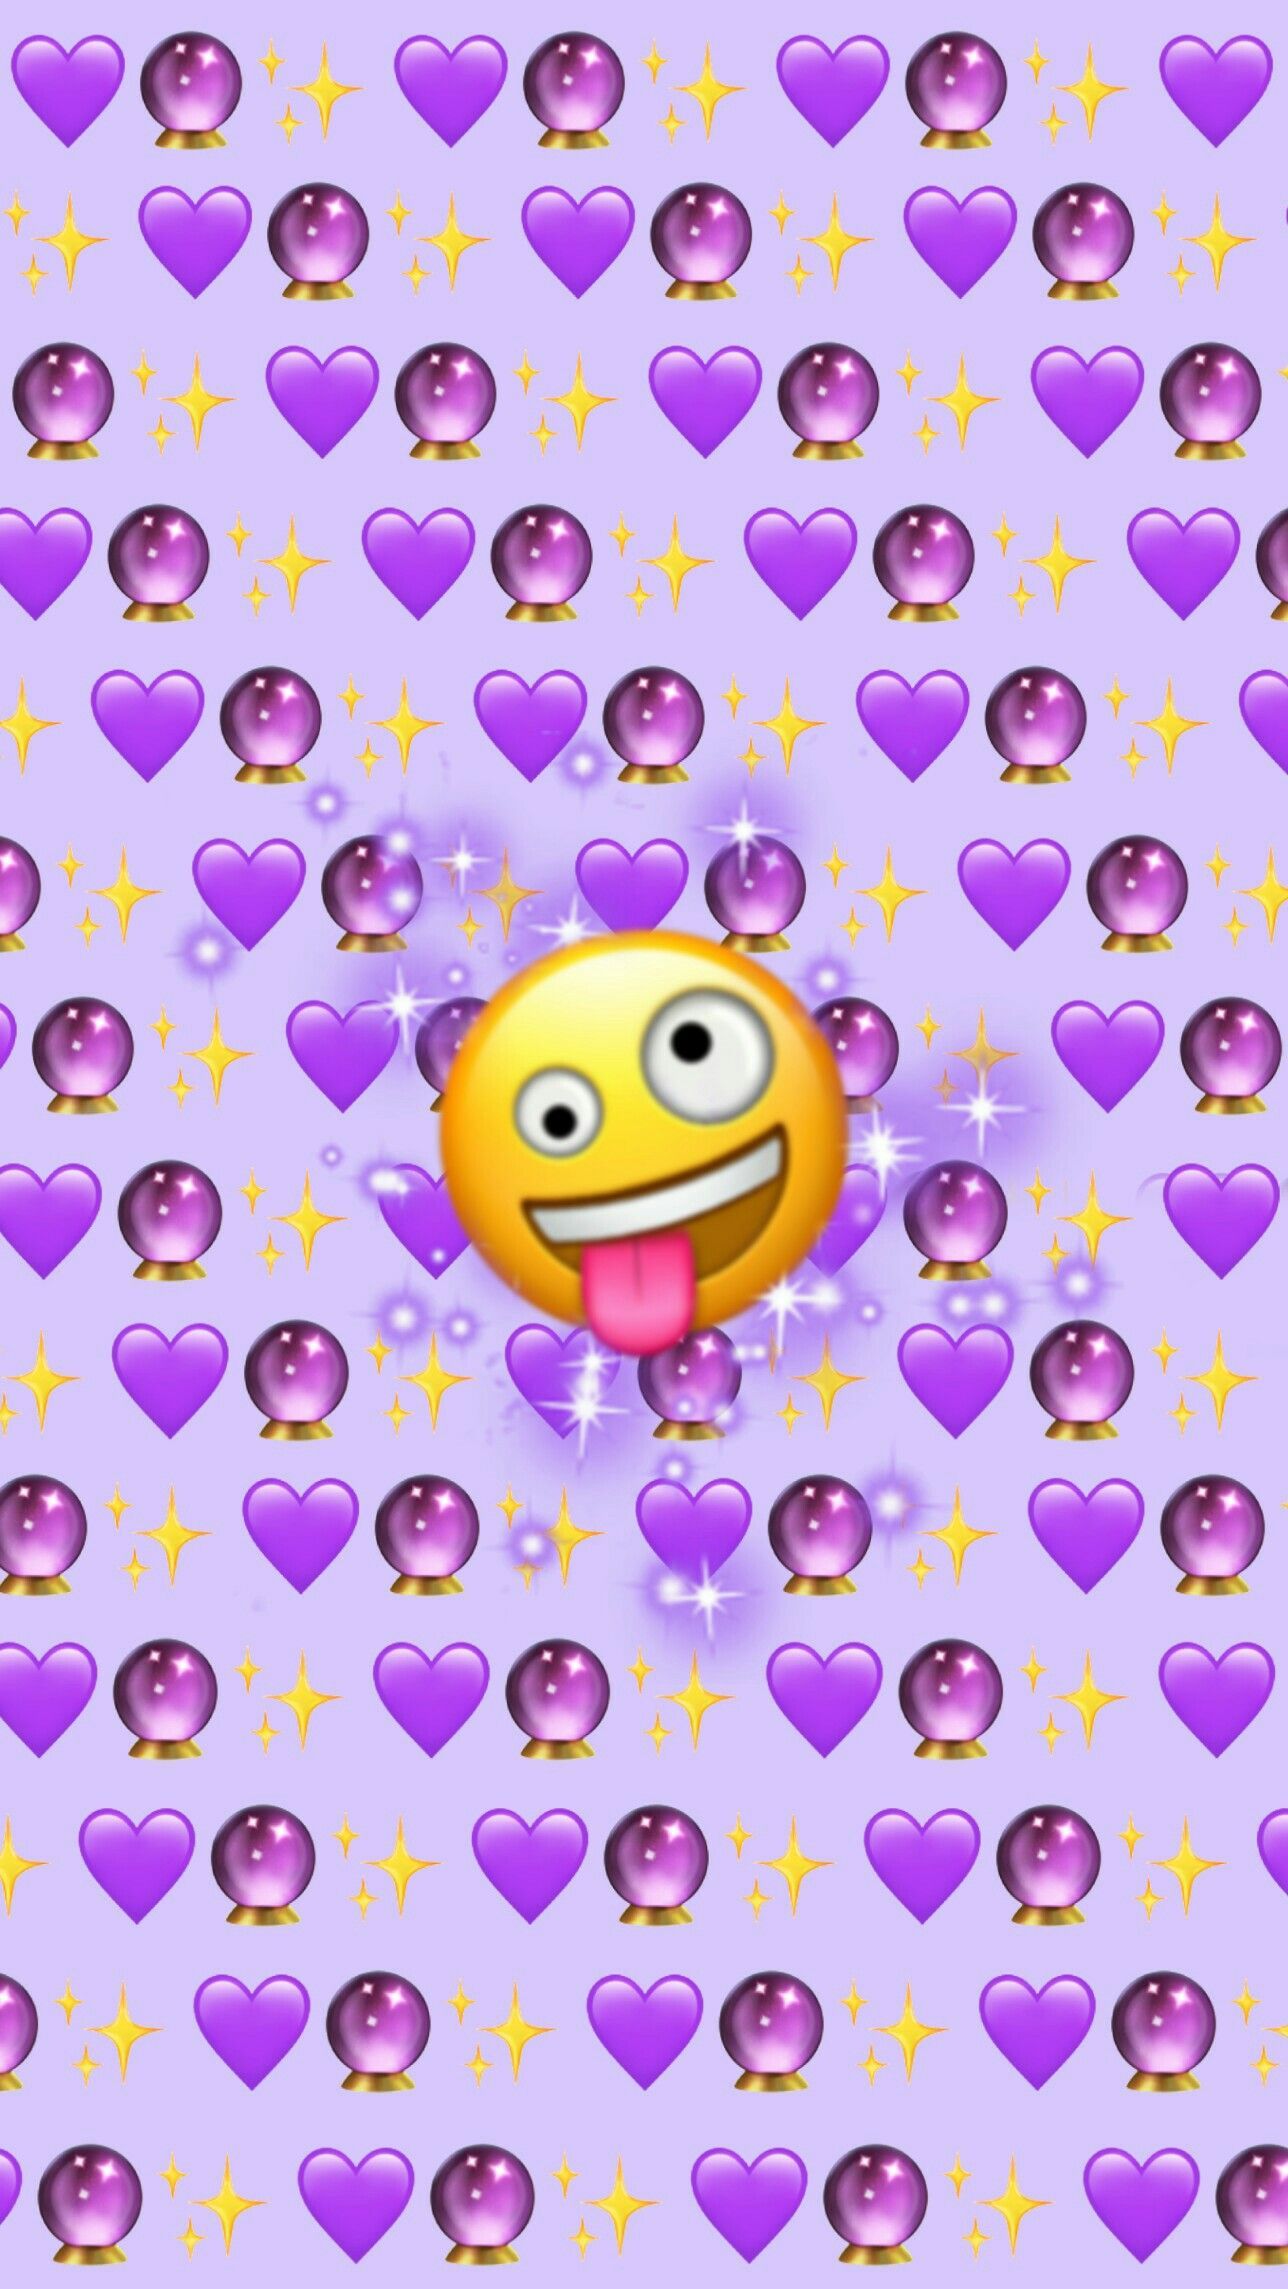 A purple background with emoticons and hearts - Emoji